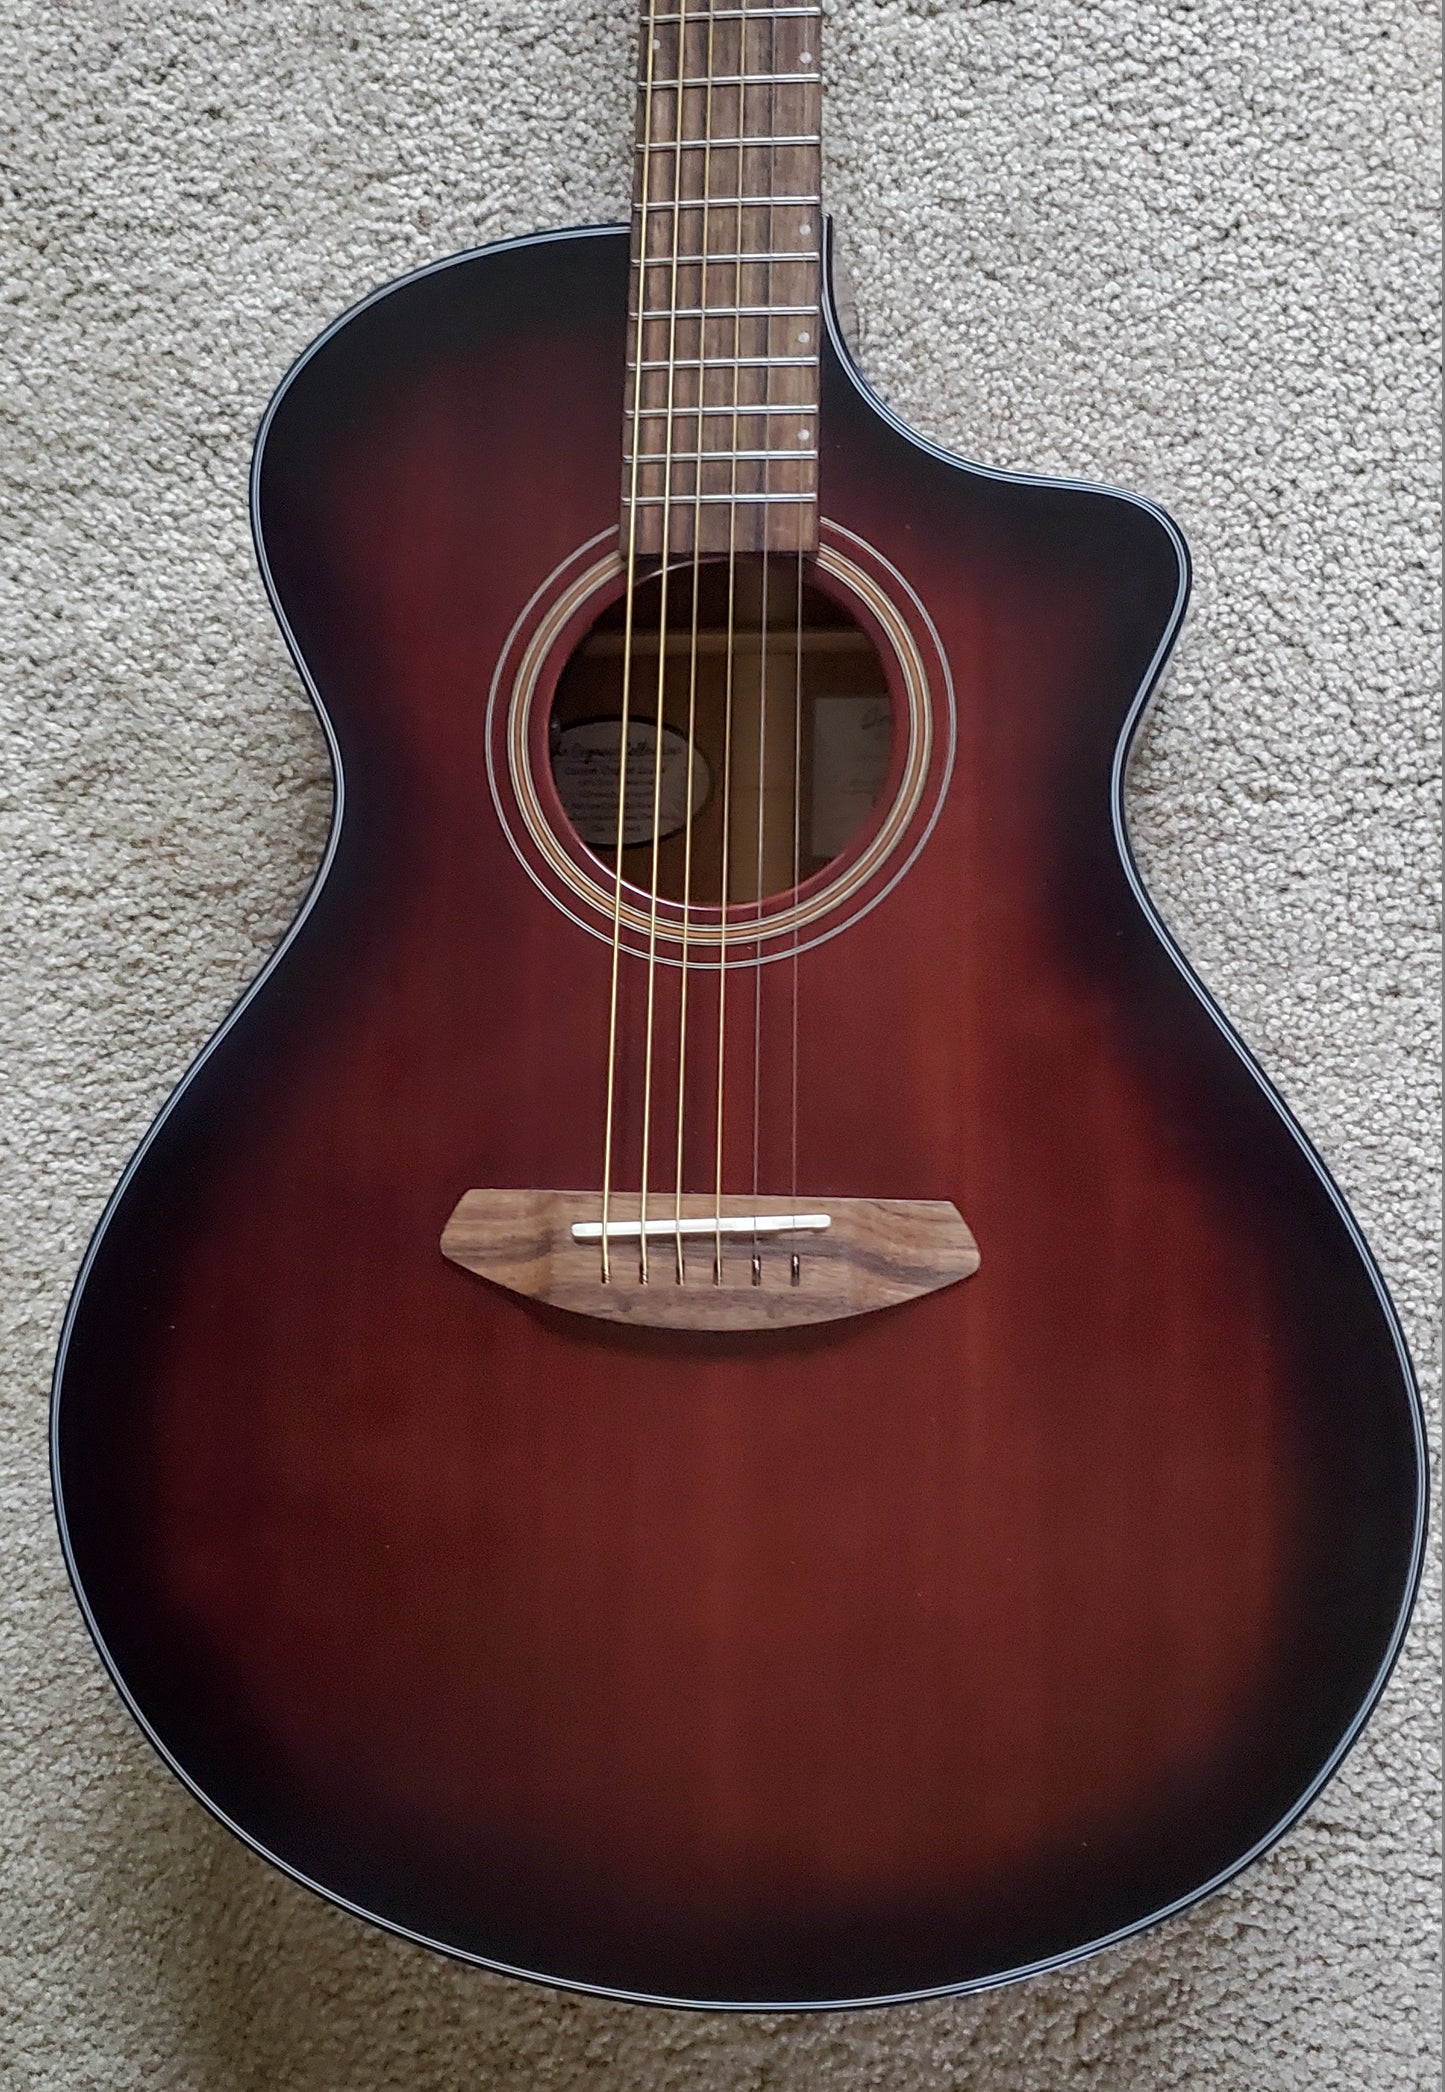 Breedlove Wildwood Concert Satin CE Whiskey Burst Acoustic Electric Guitar, New Taylor Case